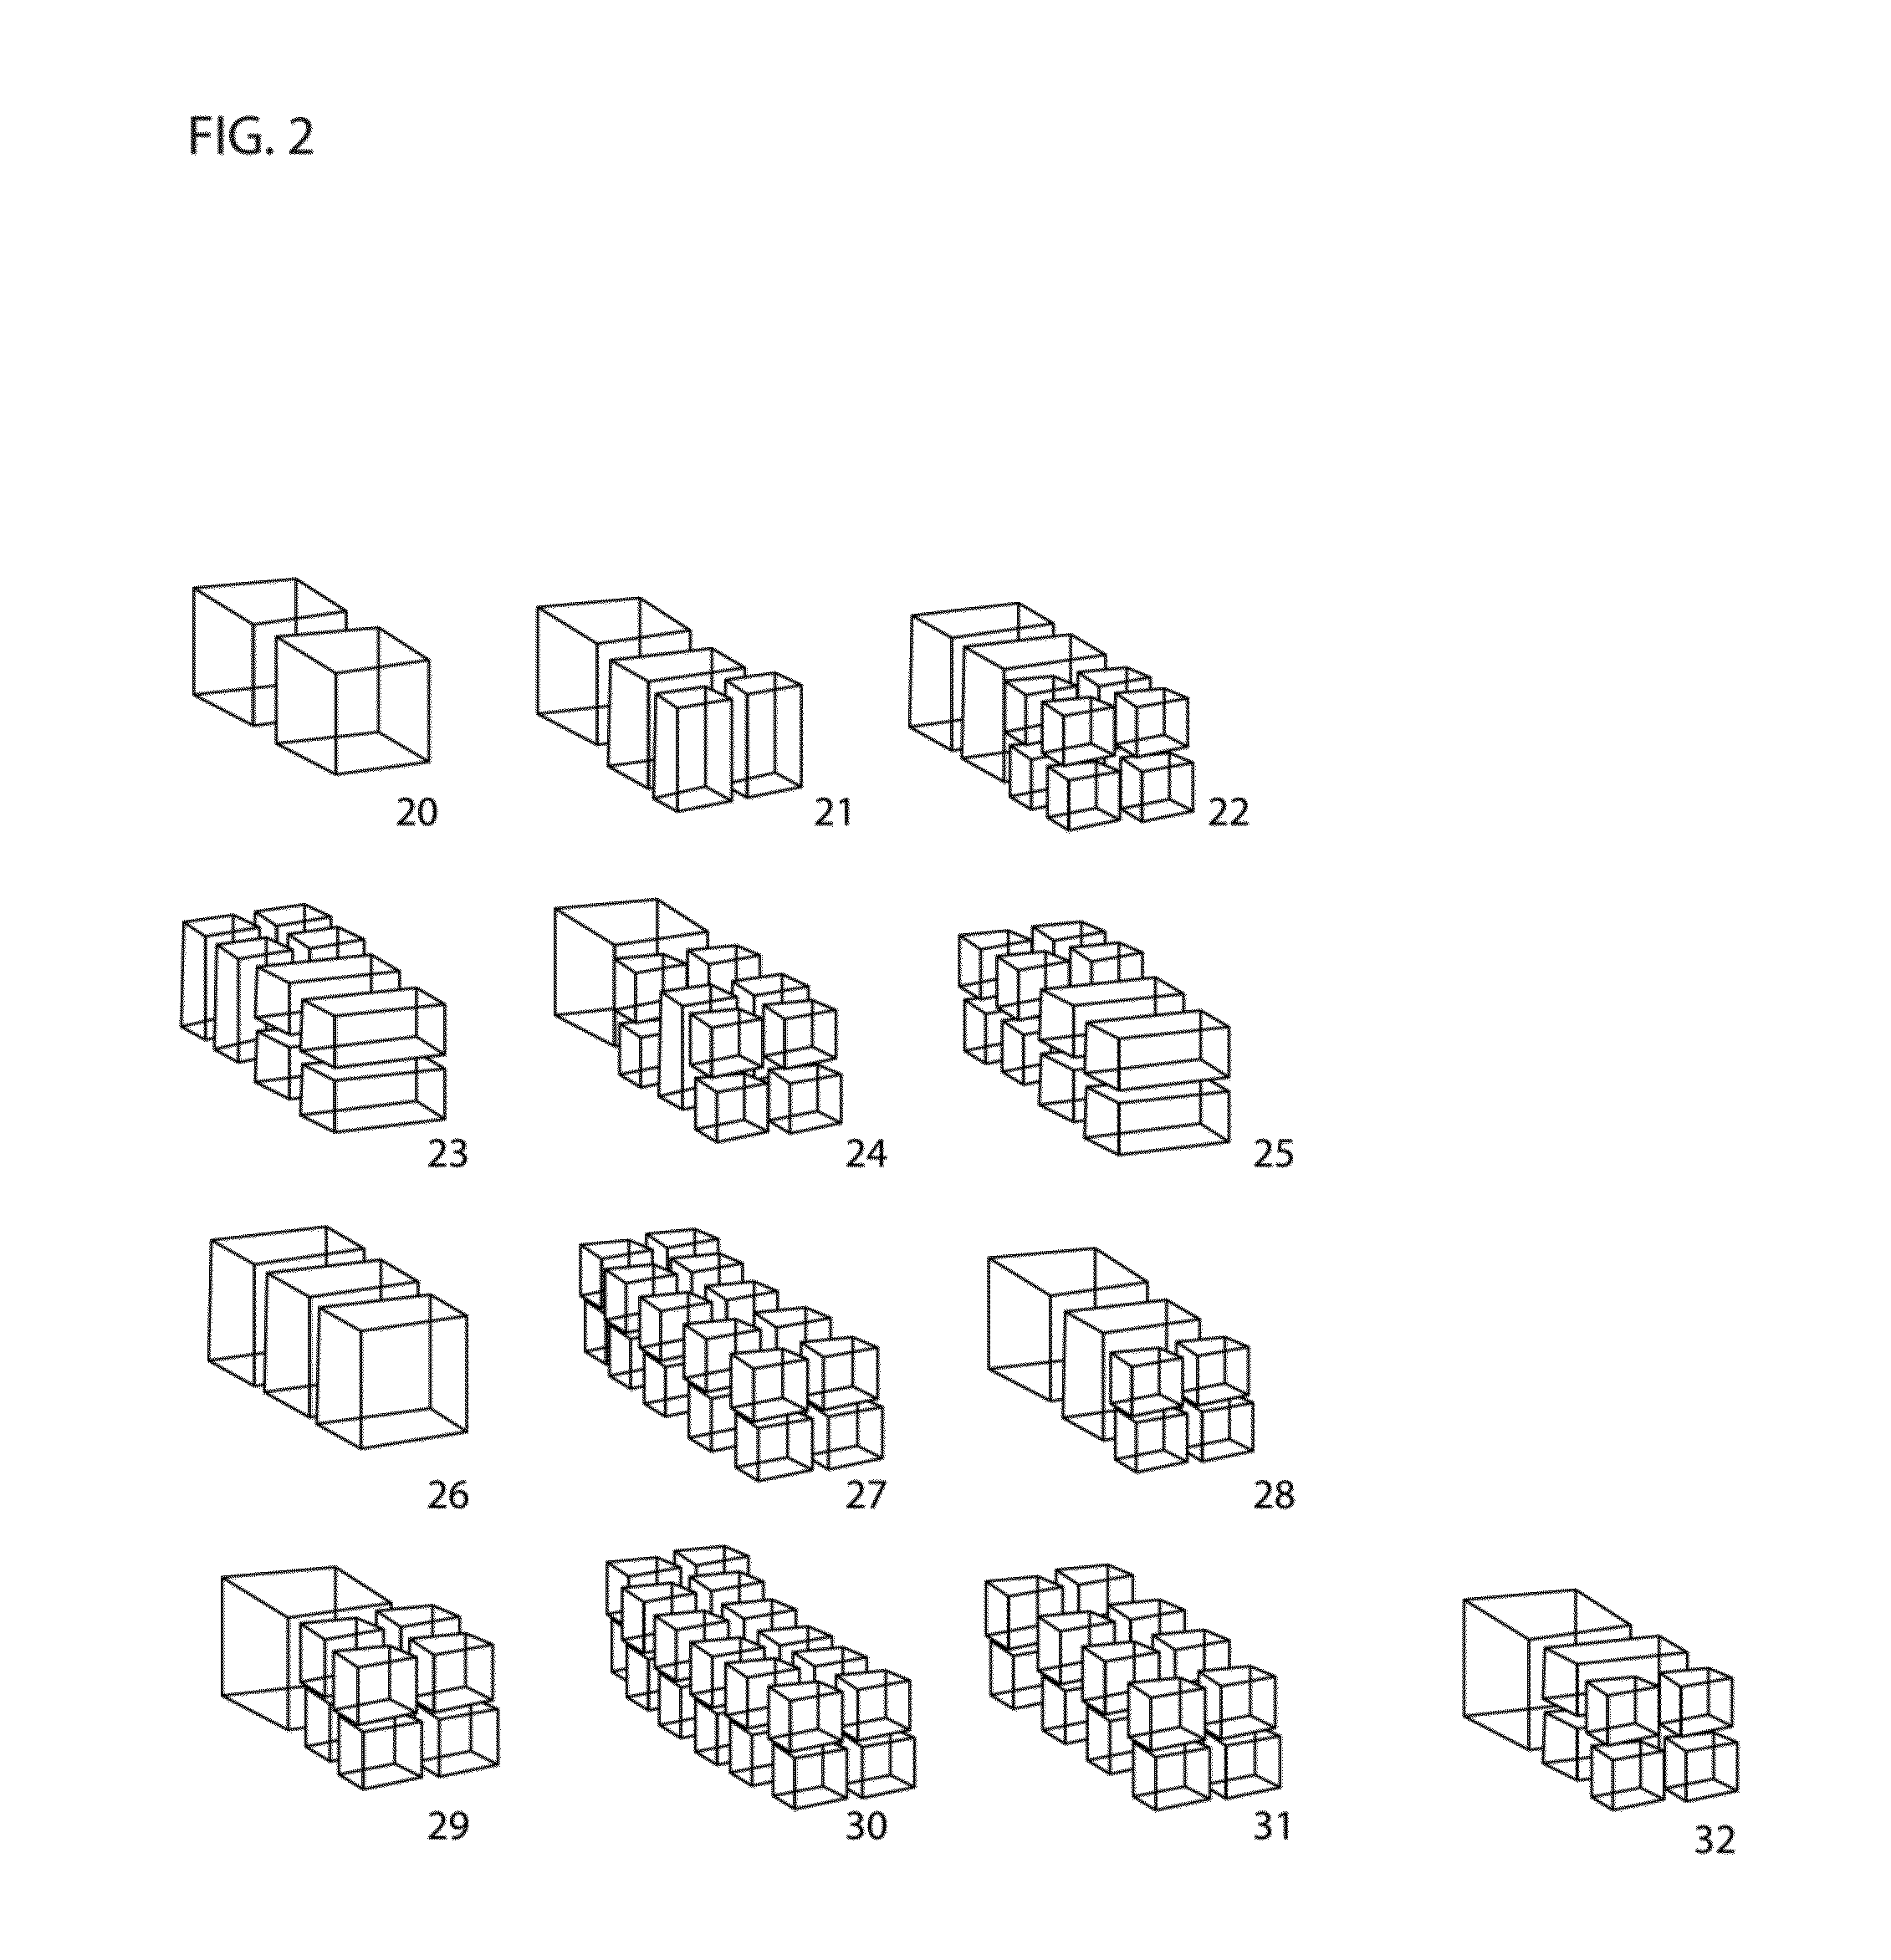 System and Method for Reducing Shipping Costs